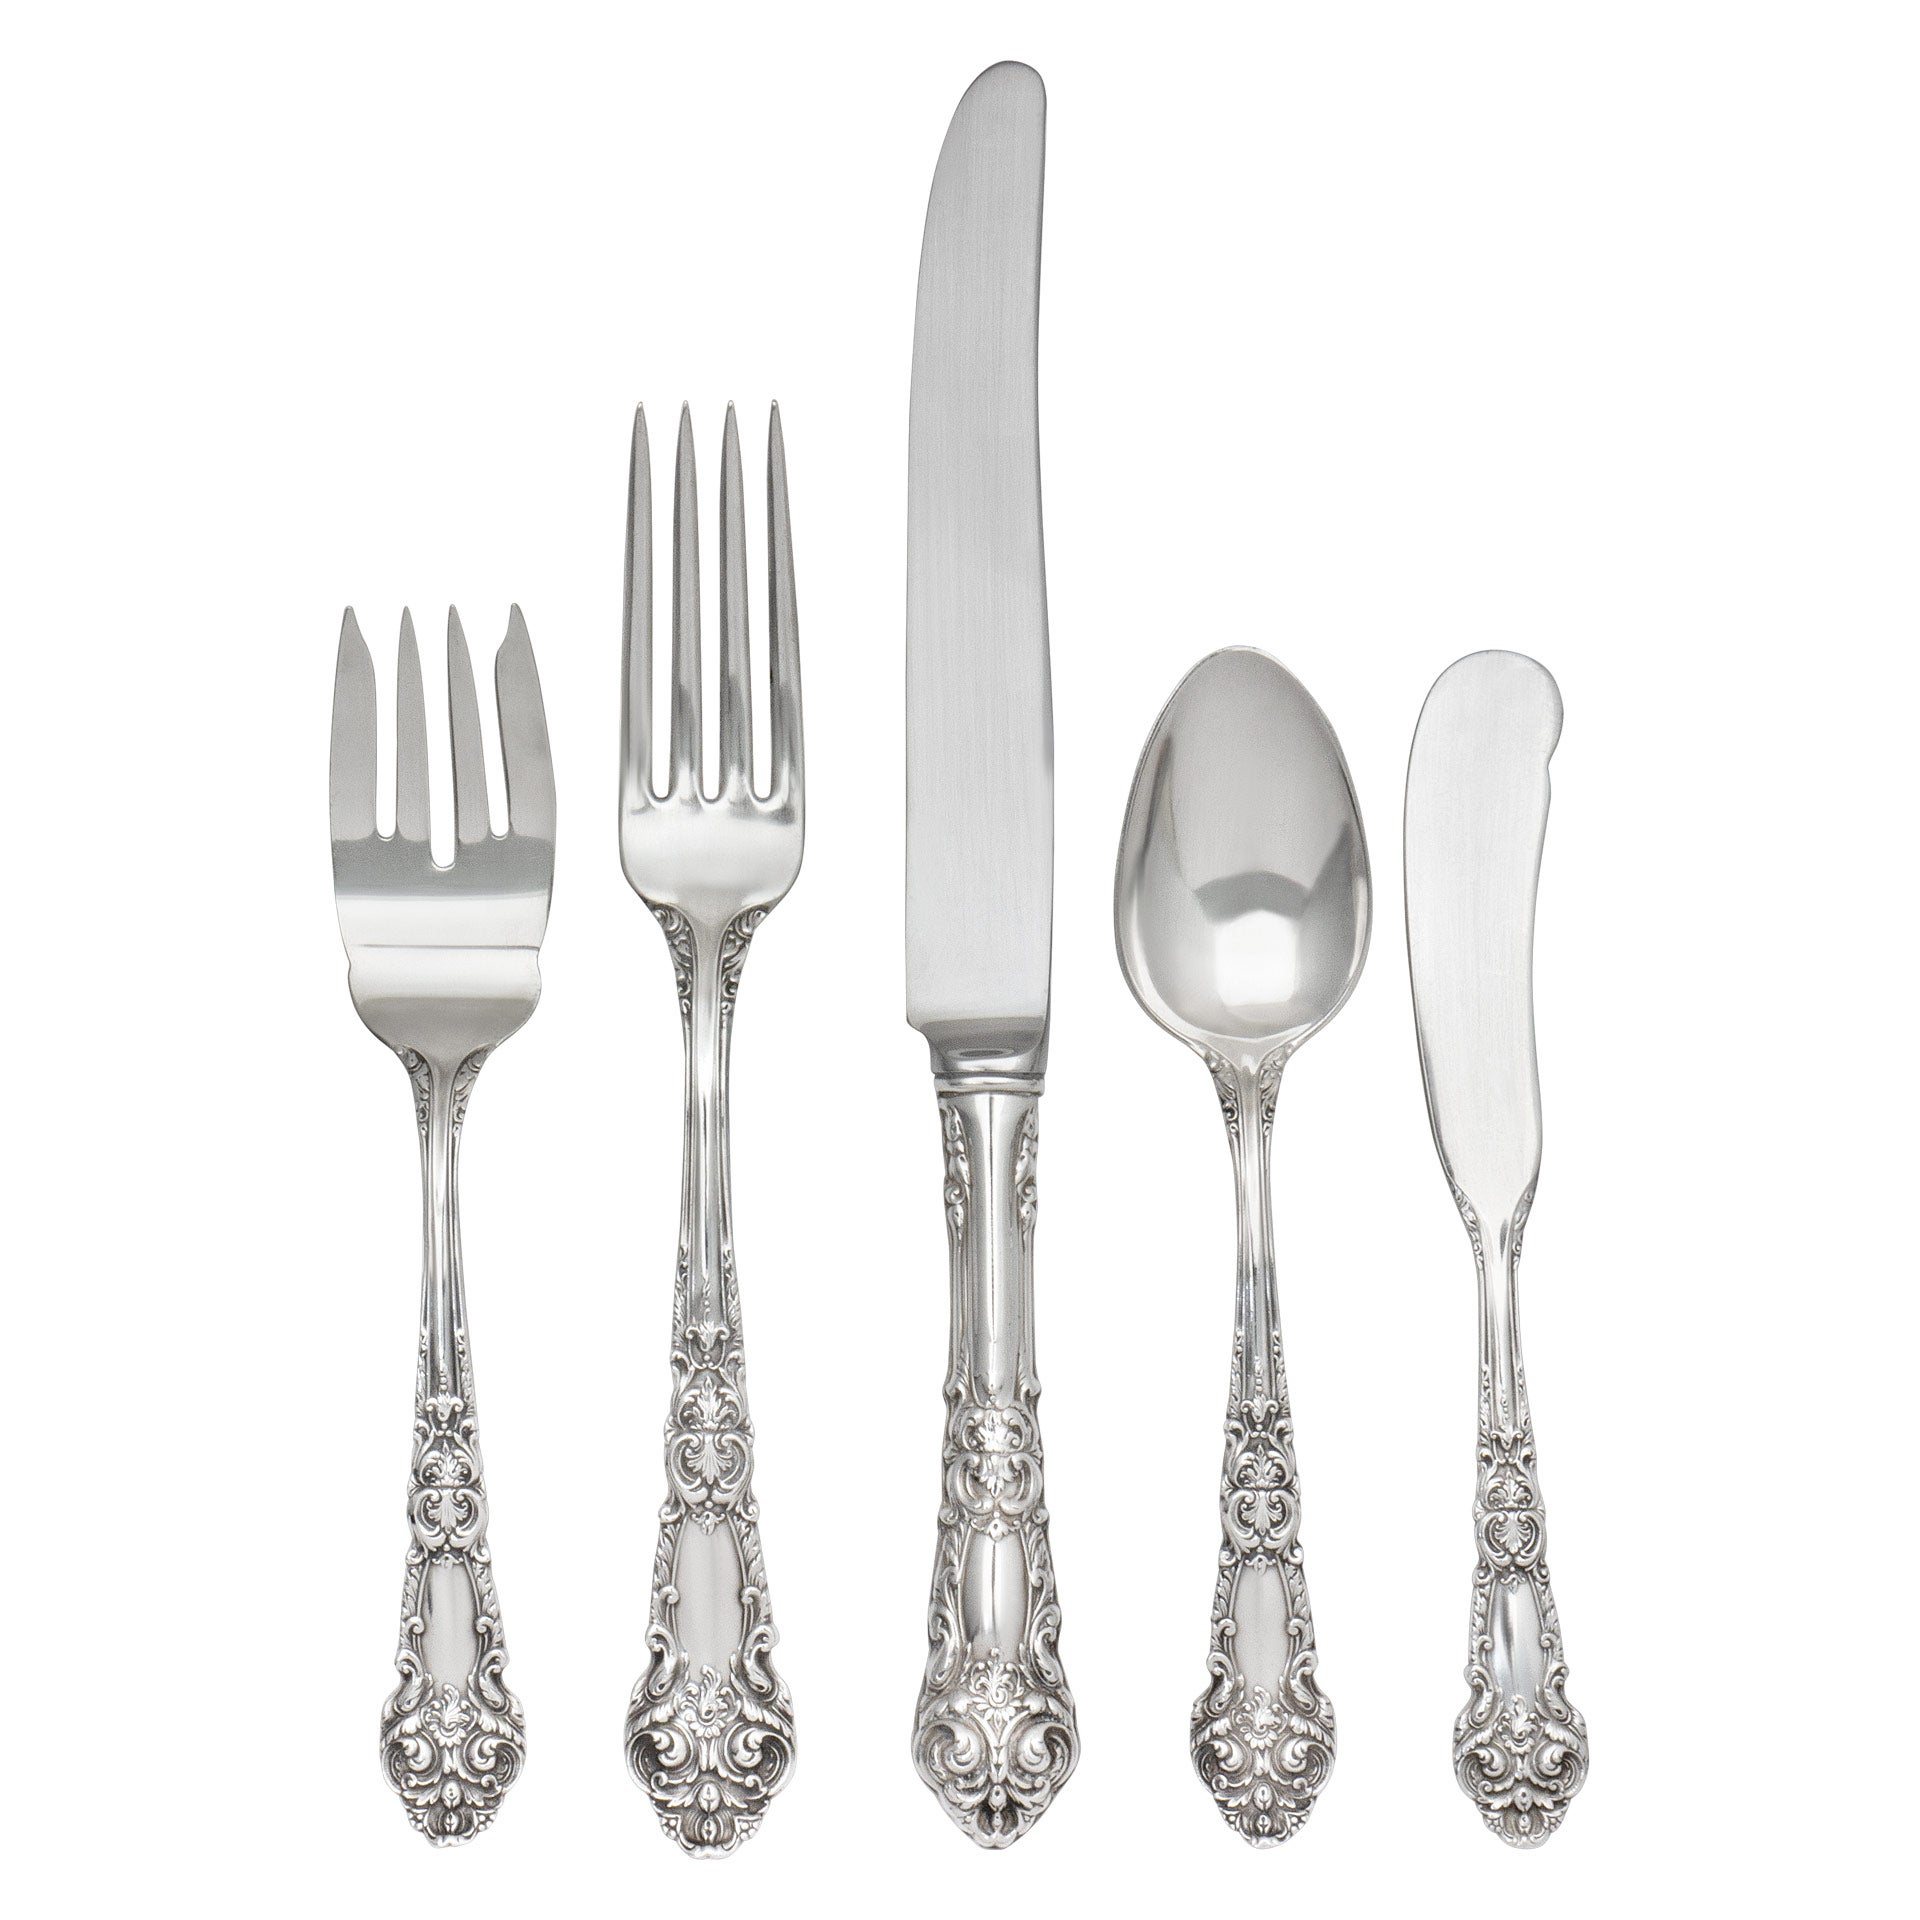 Is sterling silverware worth anything?